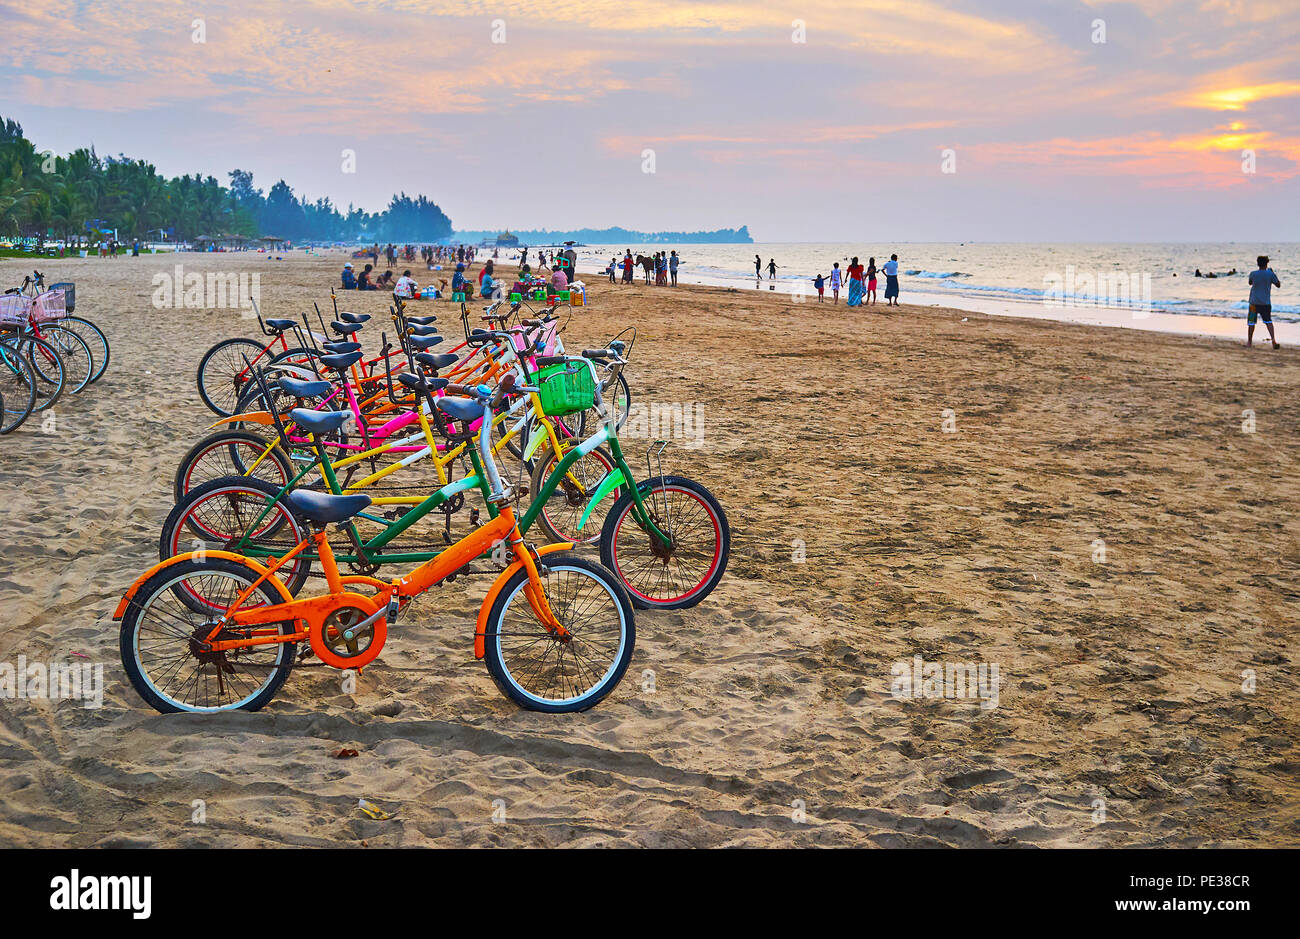 Bike ride along the beach is traditional Burmese time spending, people often rent the cycles on coast and ride till dark night, Chaung Tha, Myanmar. Stock Photo